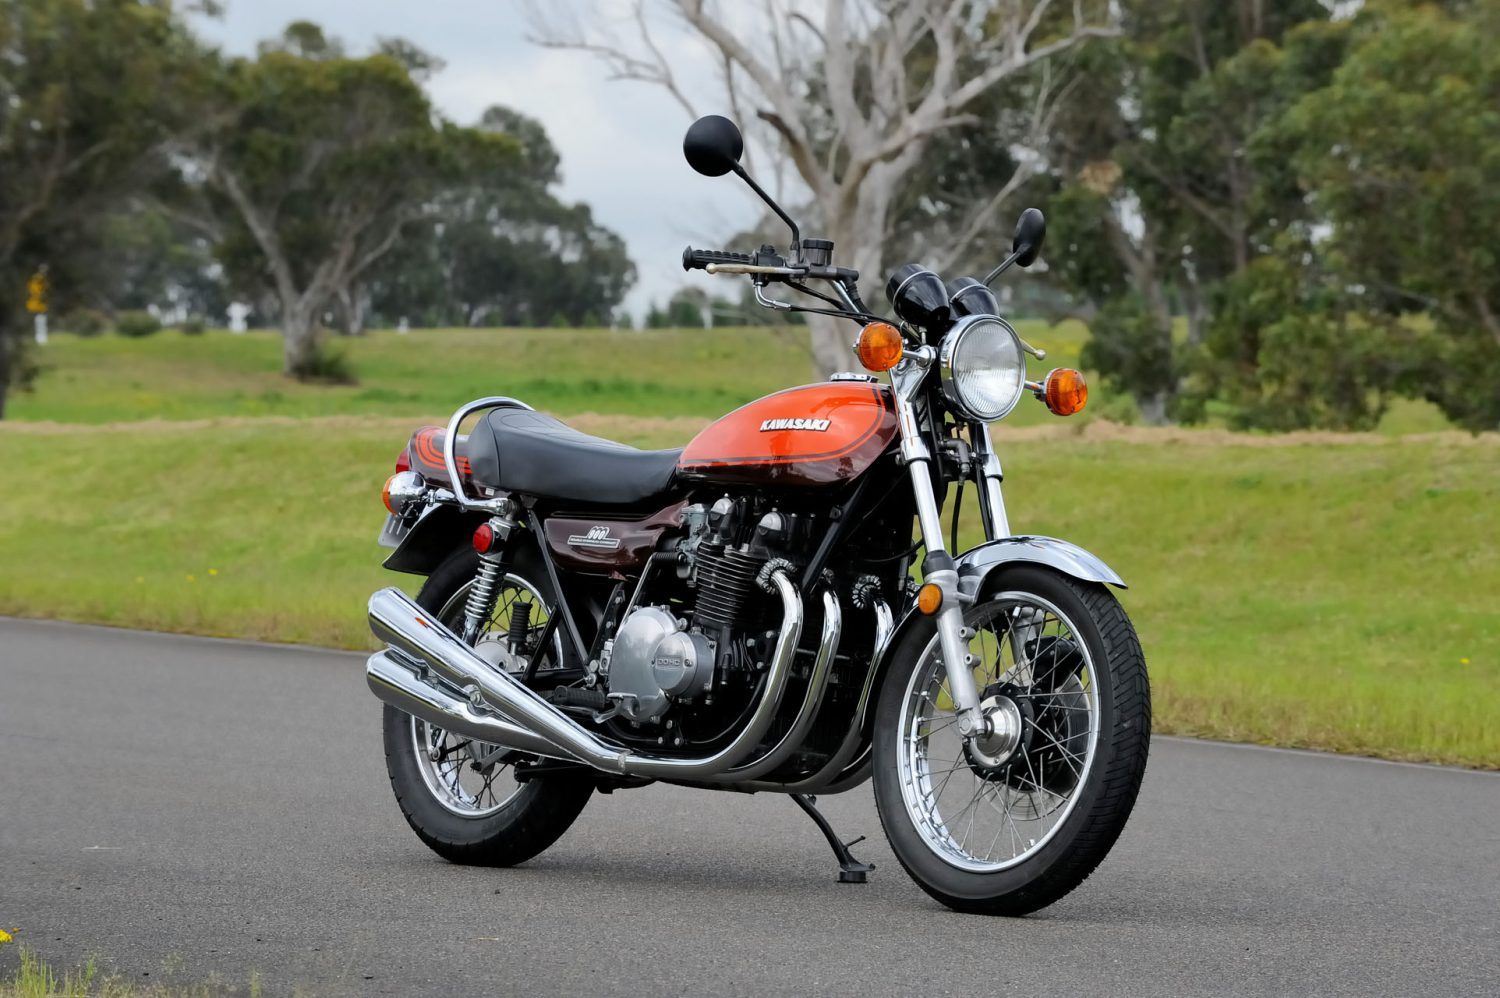 10 Classic Japanese Motorcycles We'd Love To Throw A Leg Over